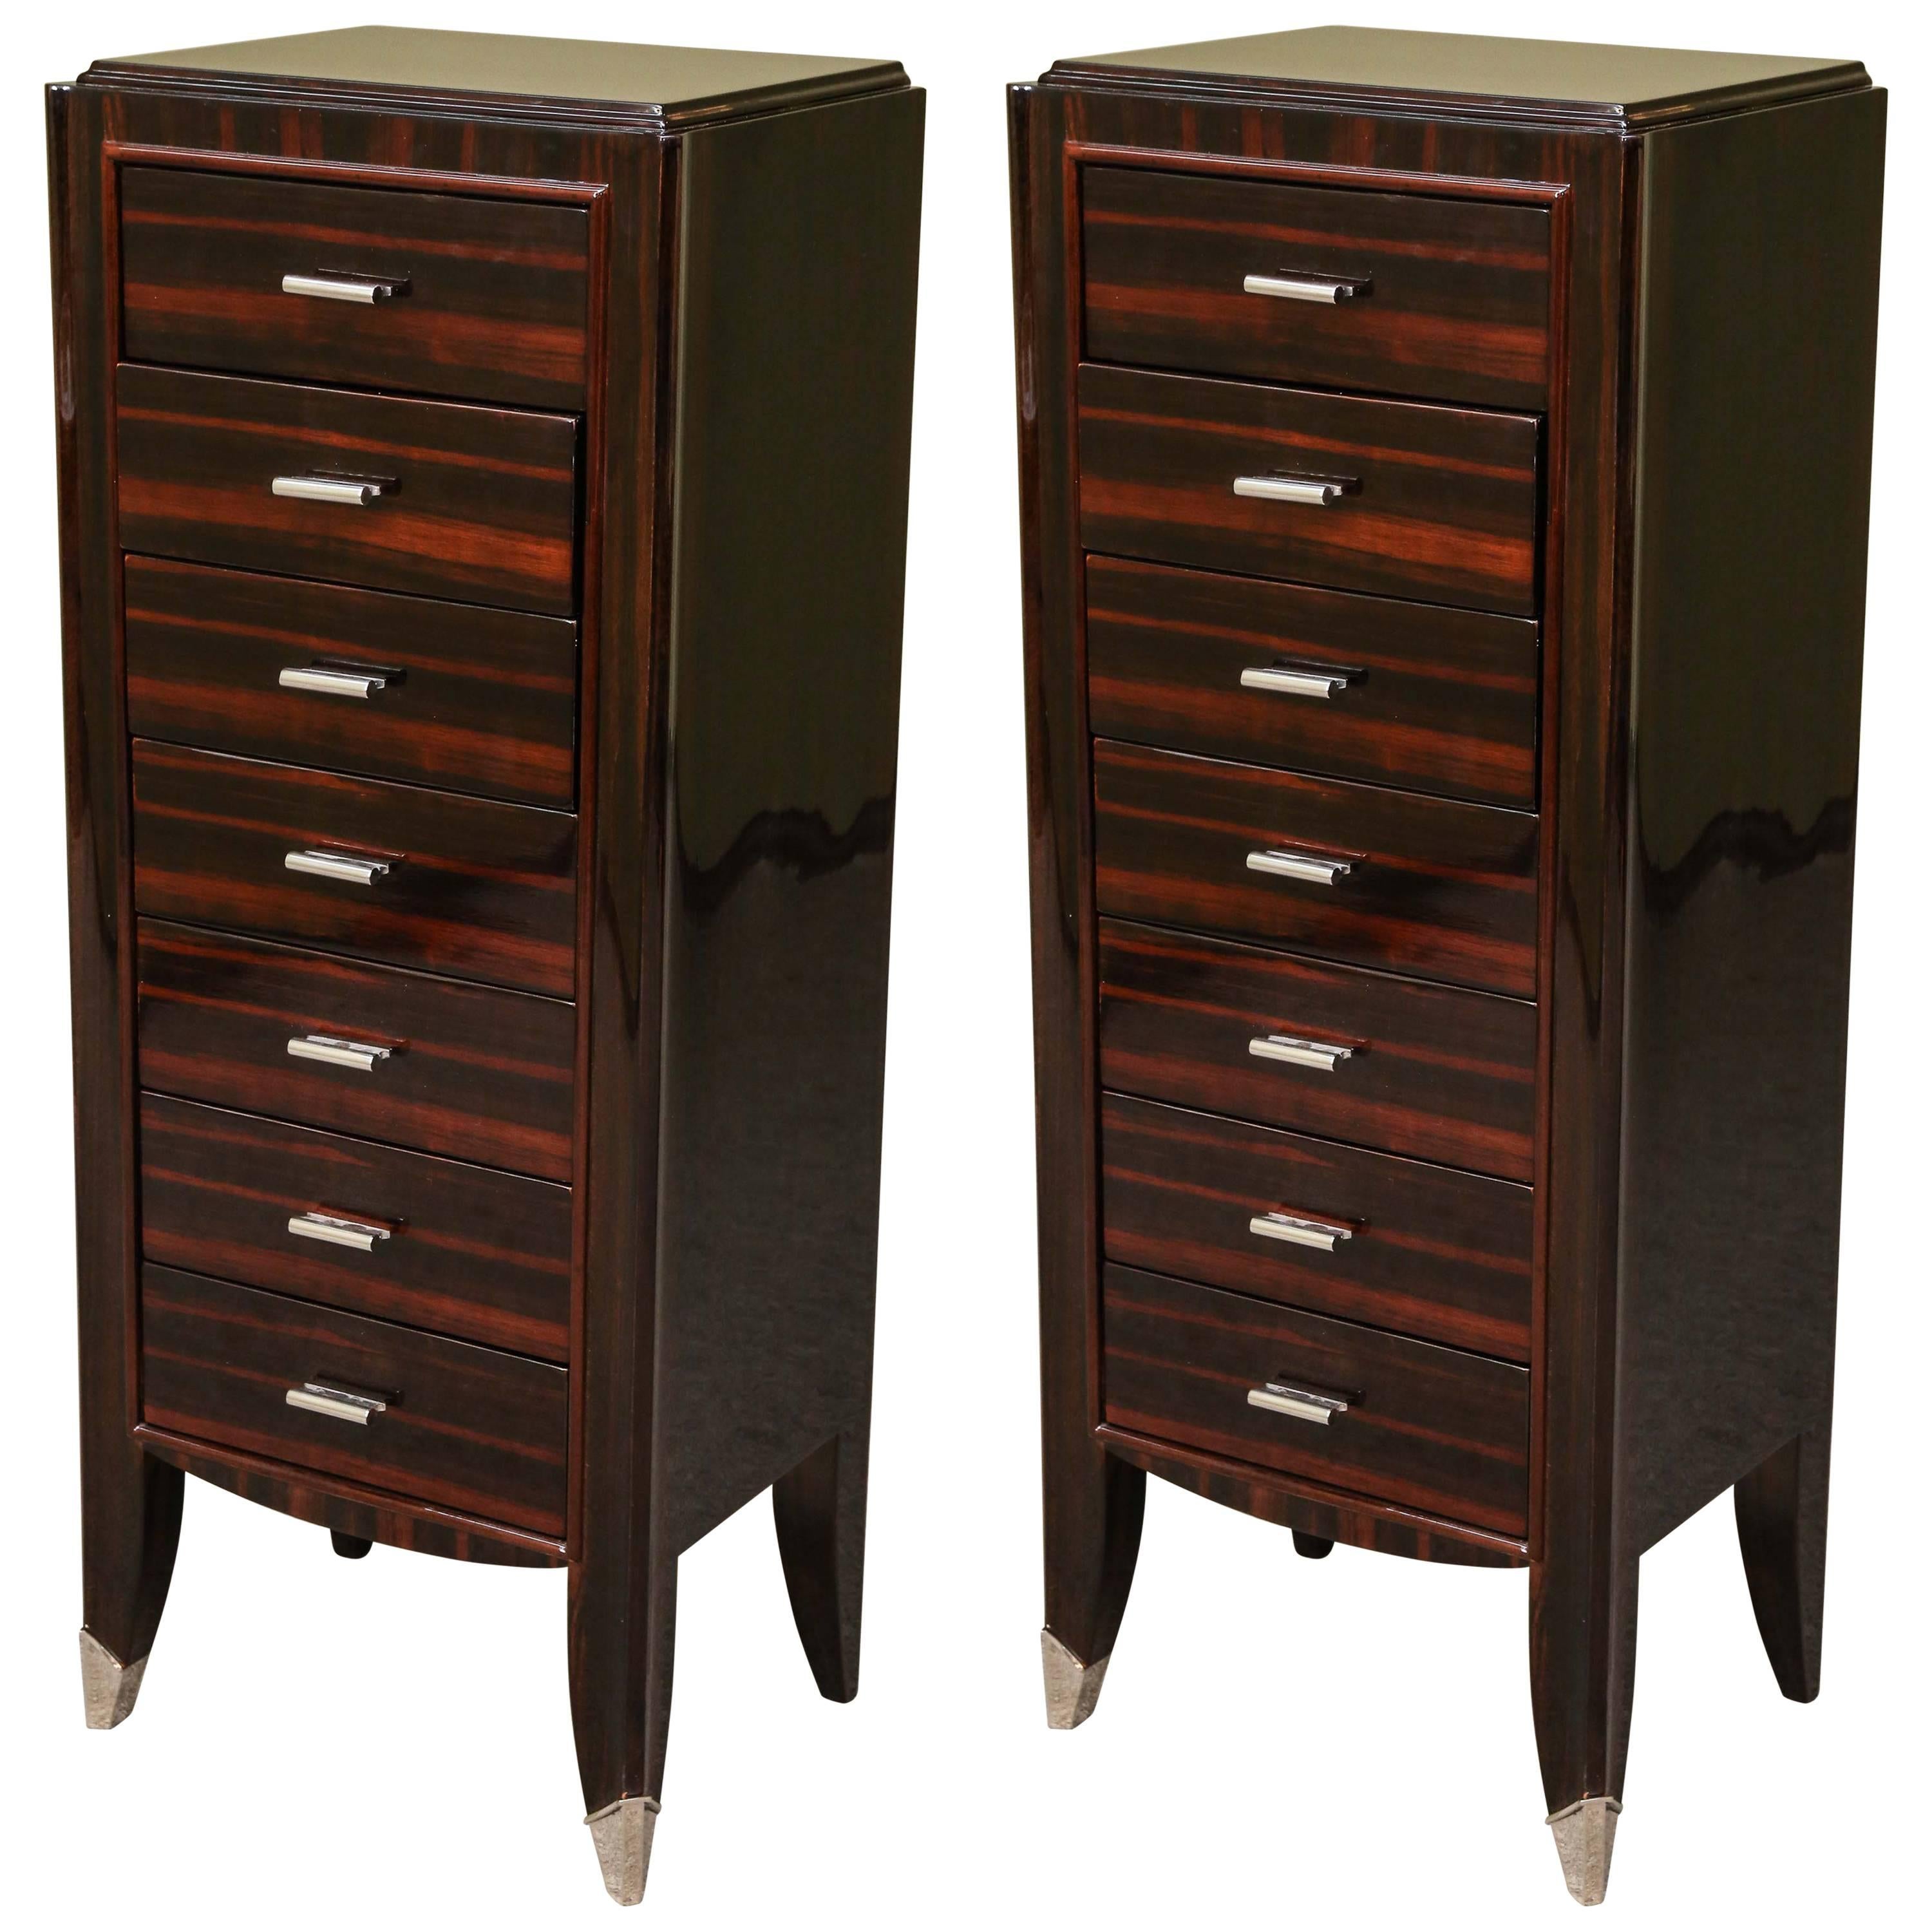  French Art Deco Chest of Drawers from Macassar wood